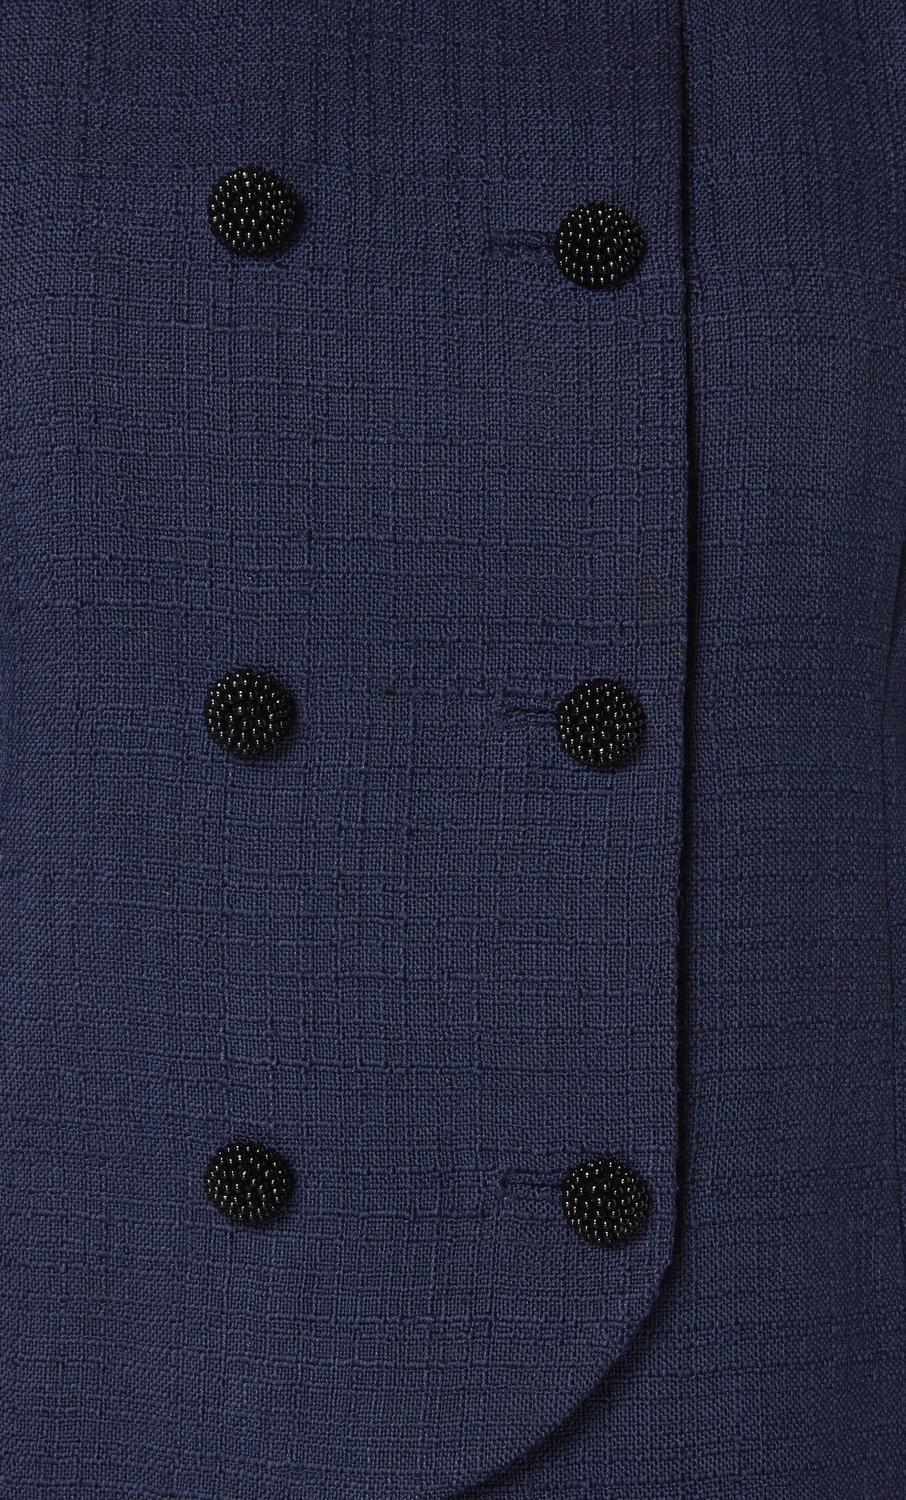 Balenciaga haute couture navy skirt suit, circa 1963 For Sale at 1stdibs